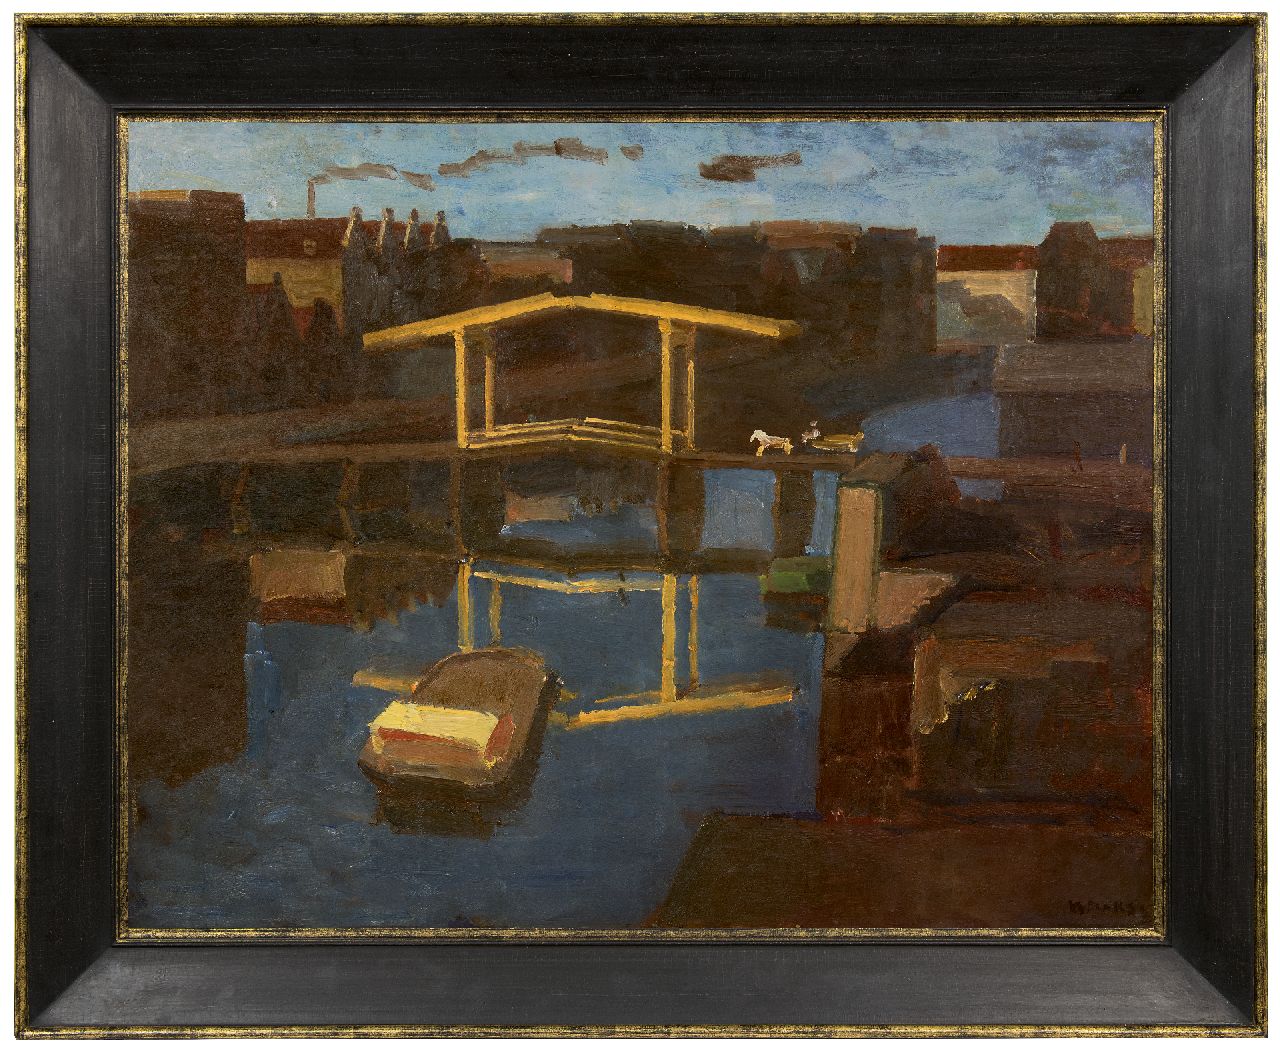 Maks C.J.  | Cornelis Johannes 'Kees' Maks | Paintings offered for sale | The drawbridge (view from  the artist's studio on the Prinseneiland, Amsterdam), oil on canvas 79.4 x 100.0 cm, signed l.r.